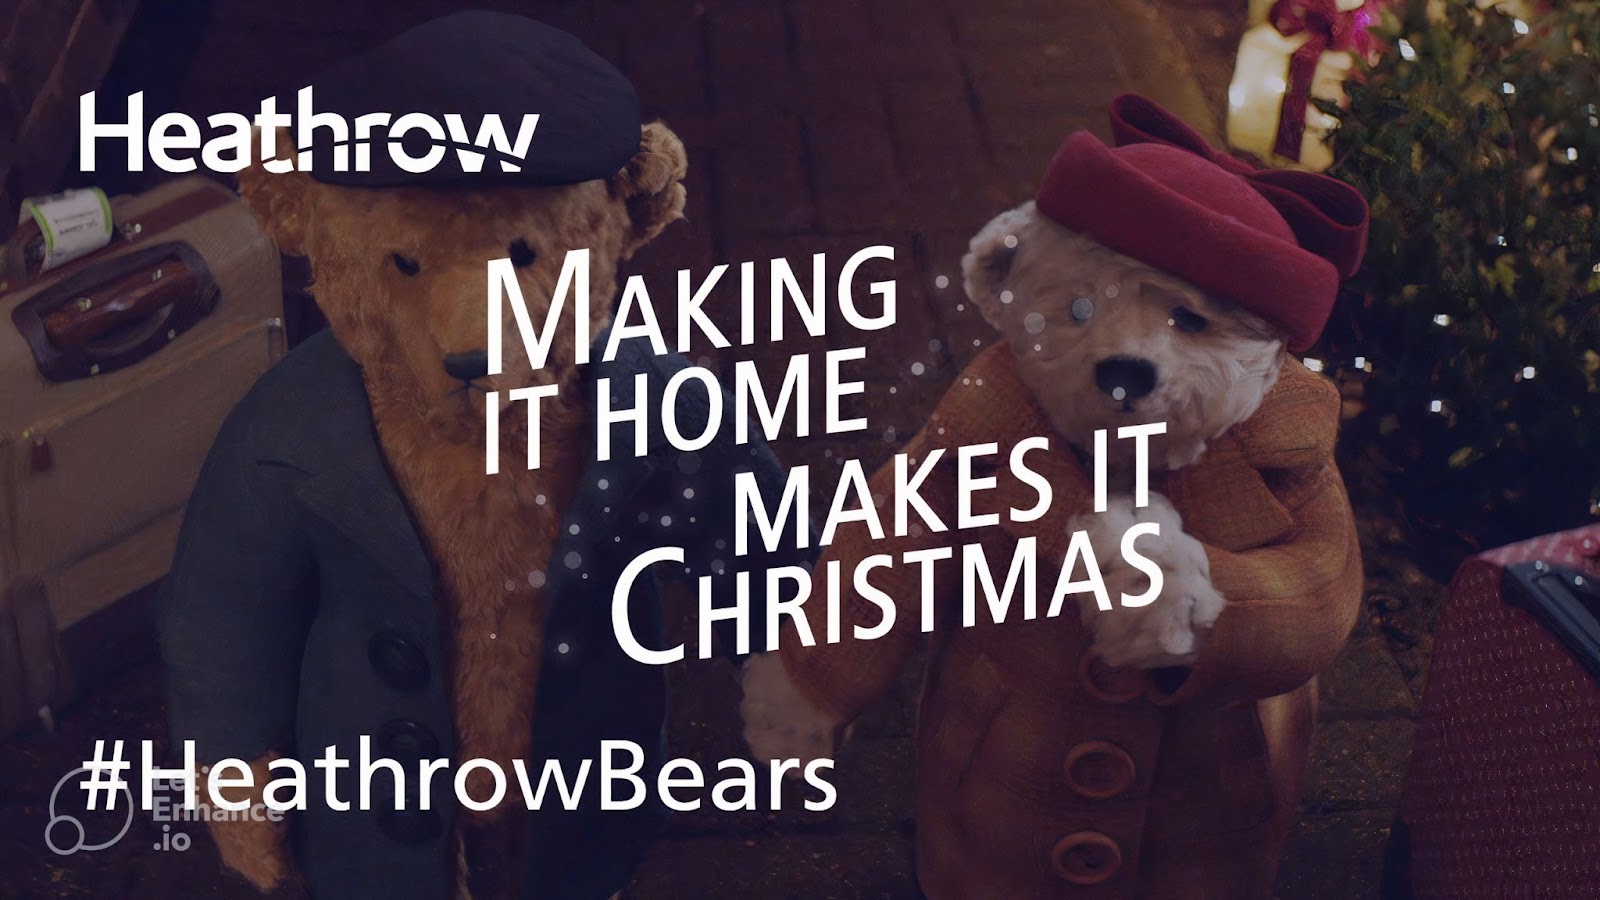 Heathrow Airport Holiday marketing campaign